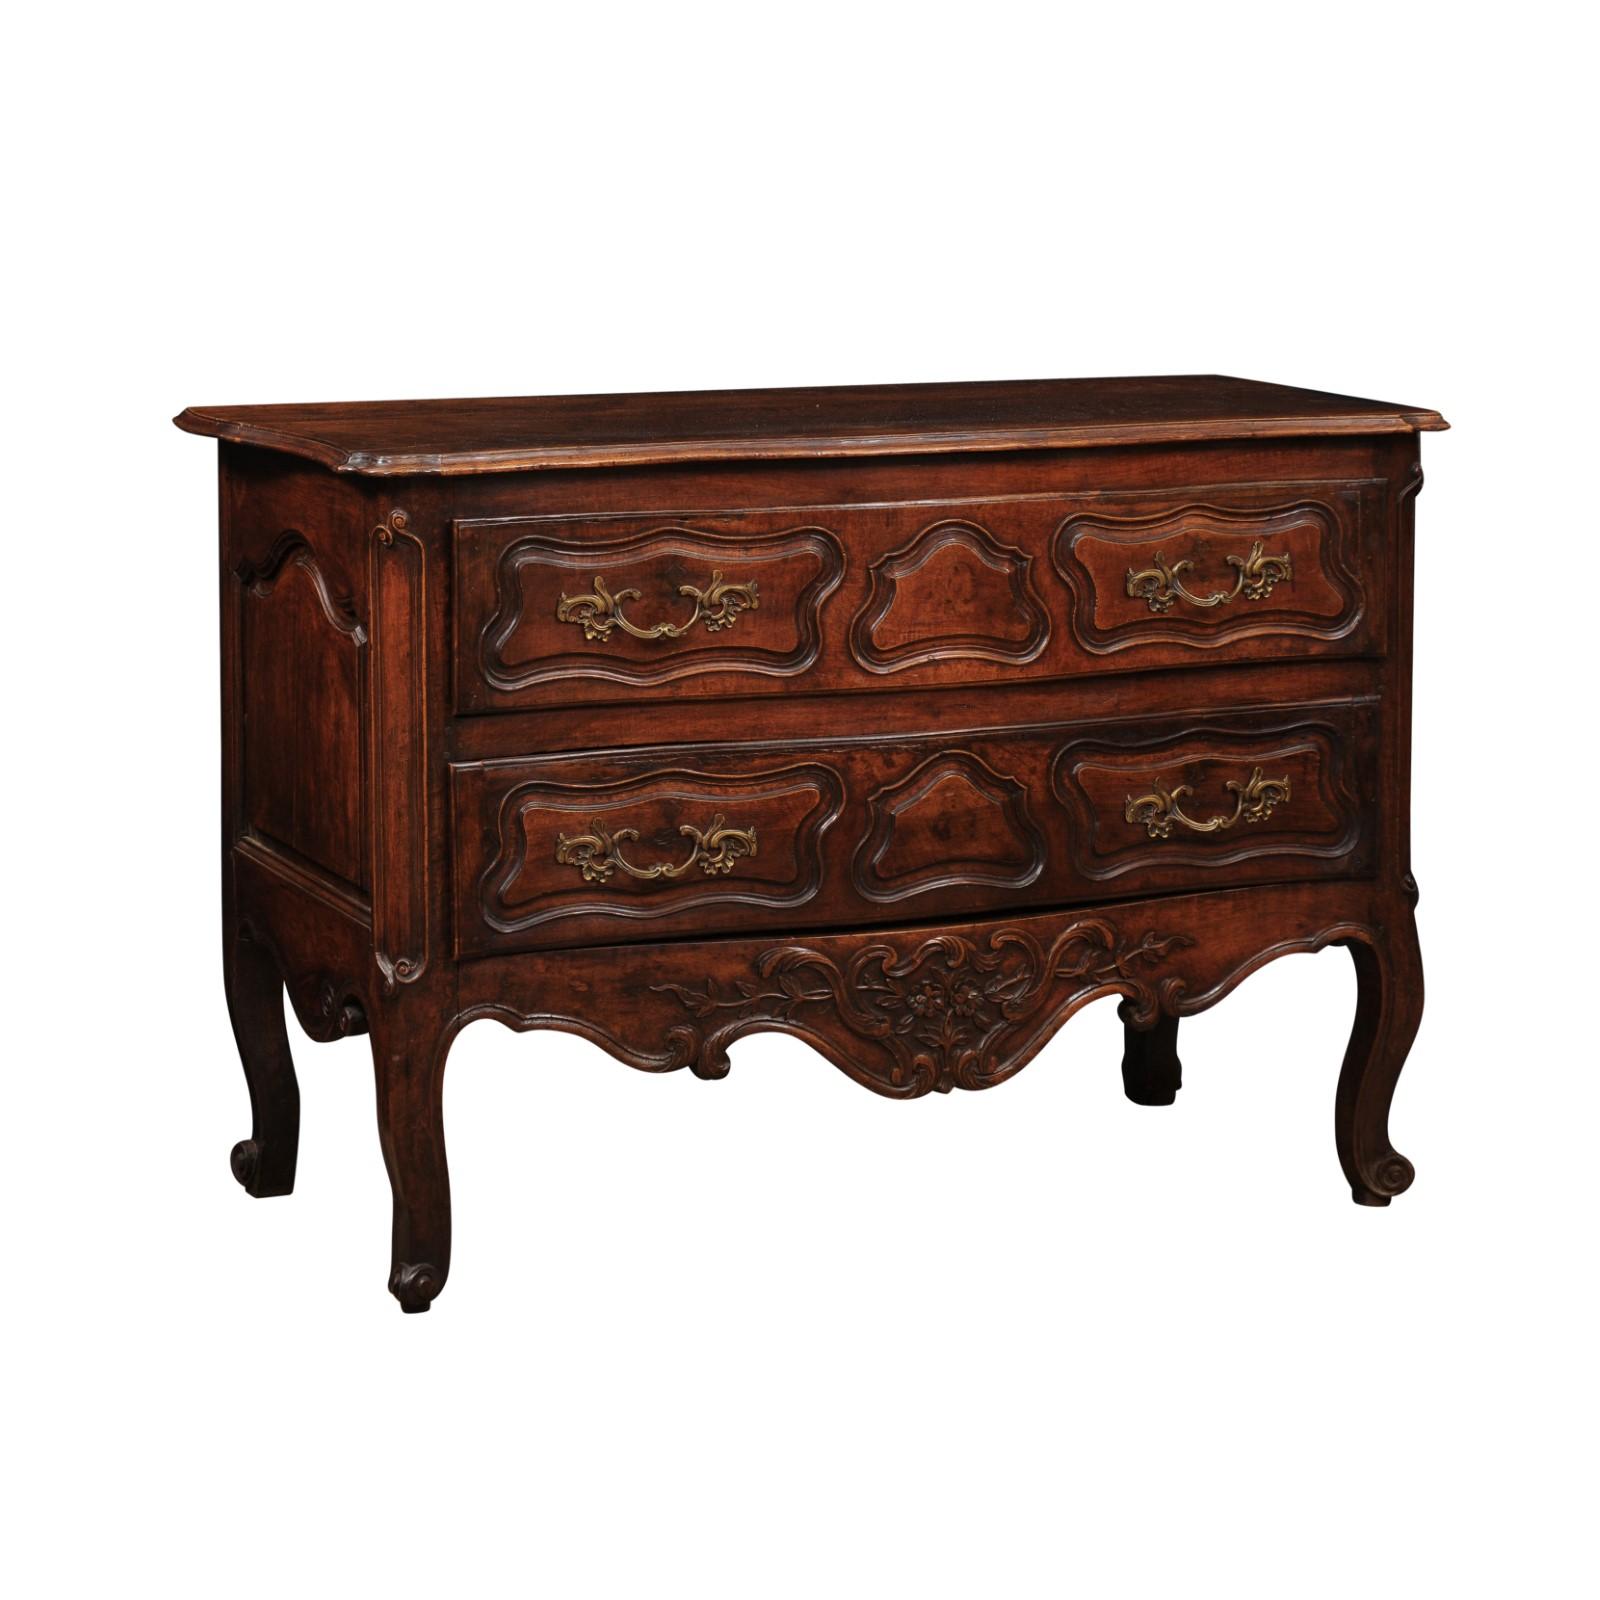  French Mid 18th Century Louis XV Walnut Commode with 2 Drawers In Good Condition For Sale In Atlanta, GA